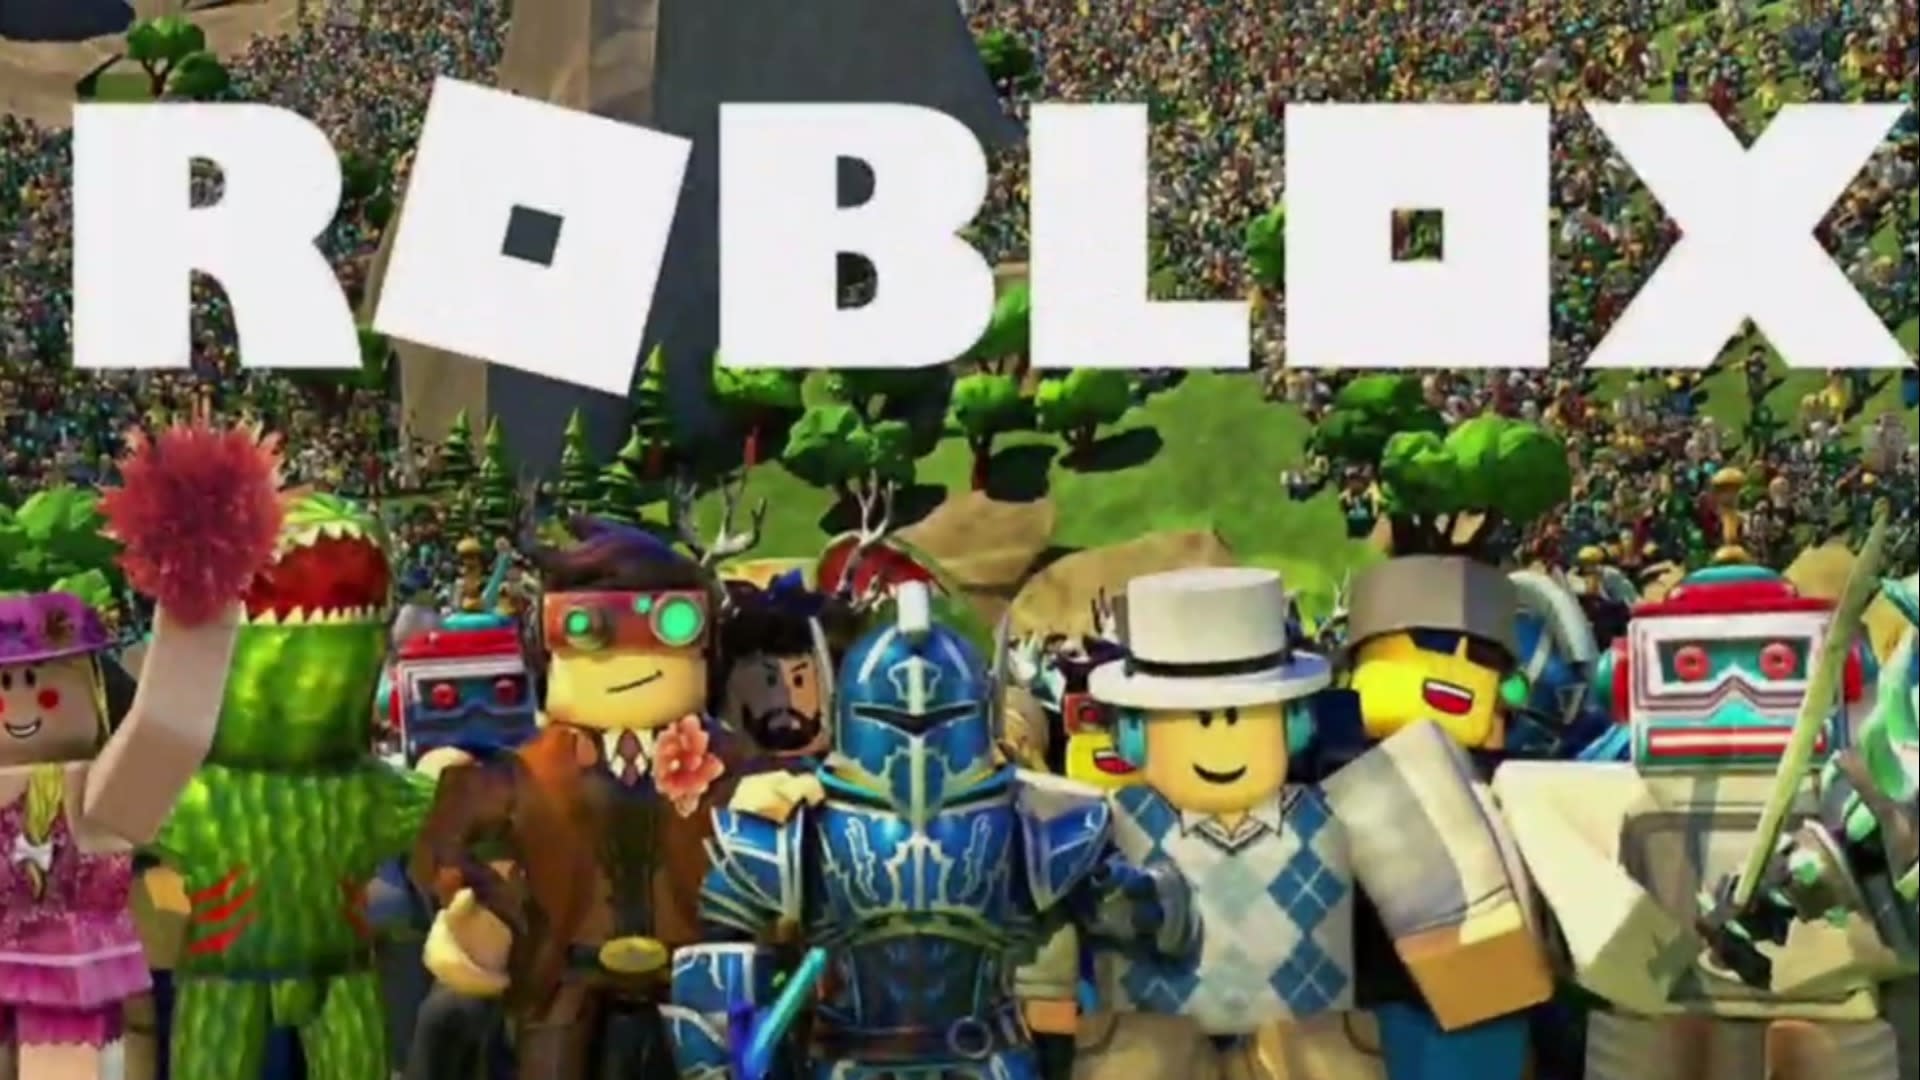 New Questions About Some Inappropriate Content On The Gaming Platform Roblox Video - roblox search api